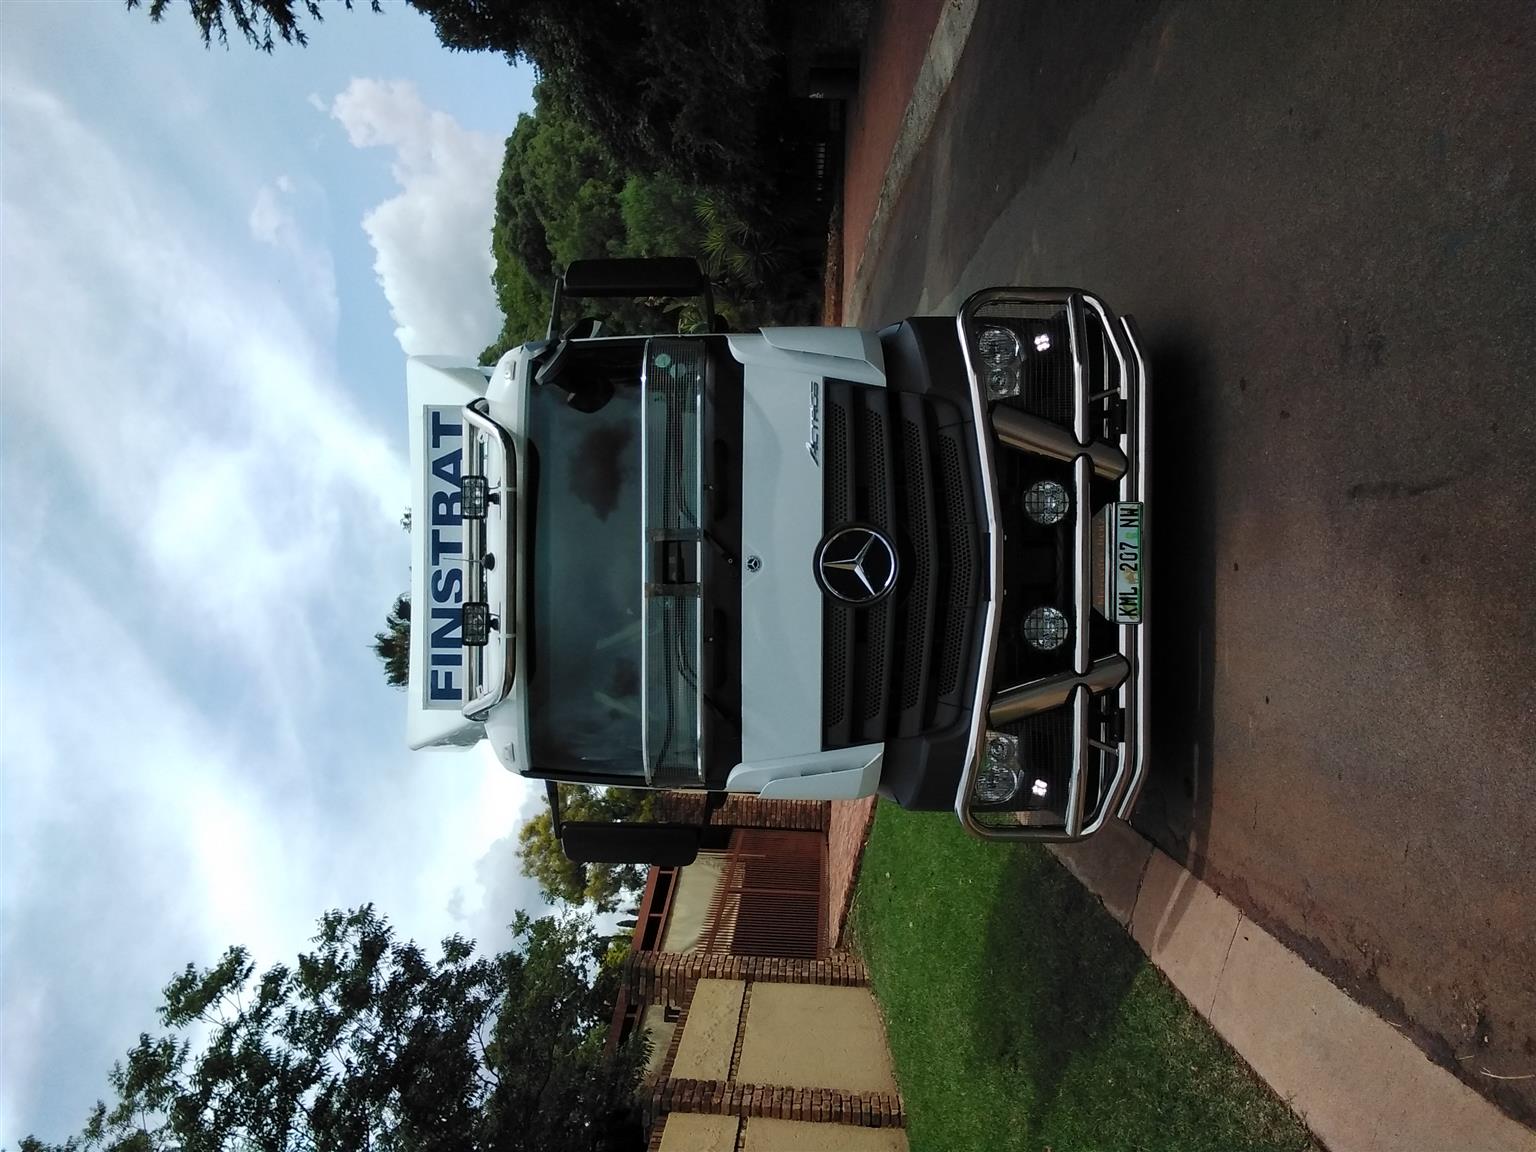 2019 Actros, 18-360 only 70 800kms